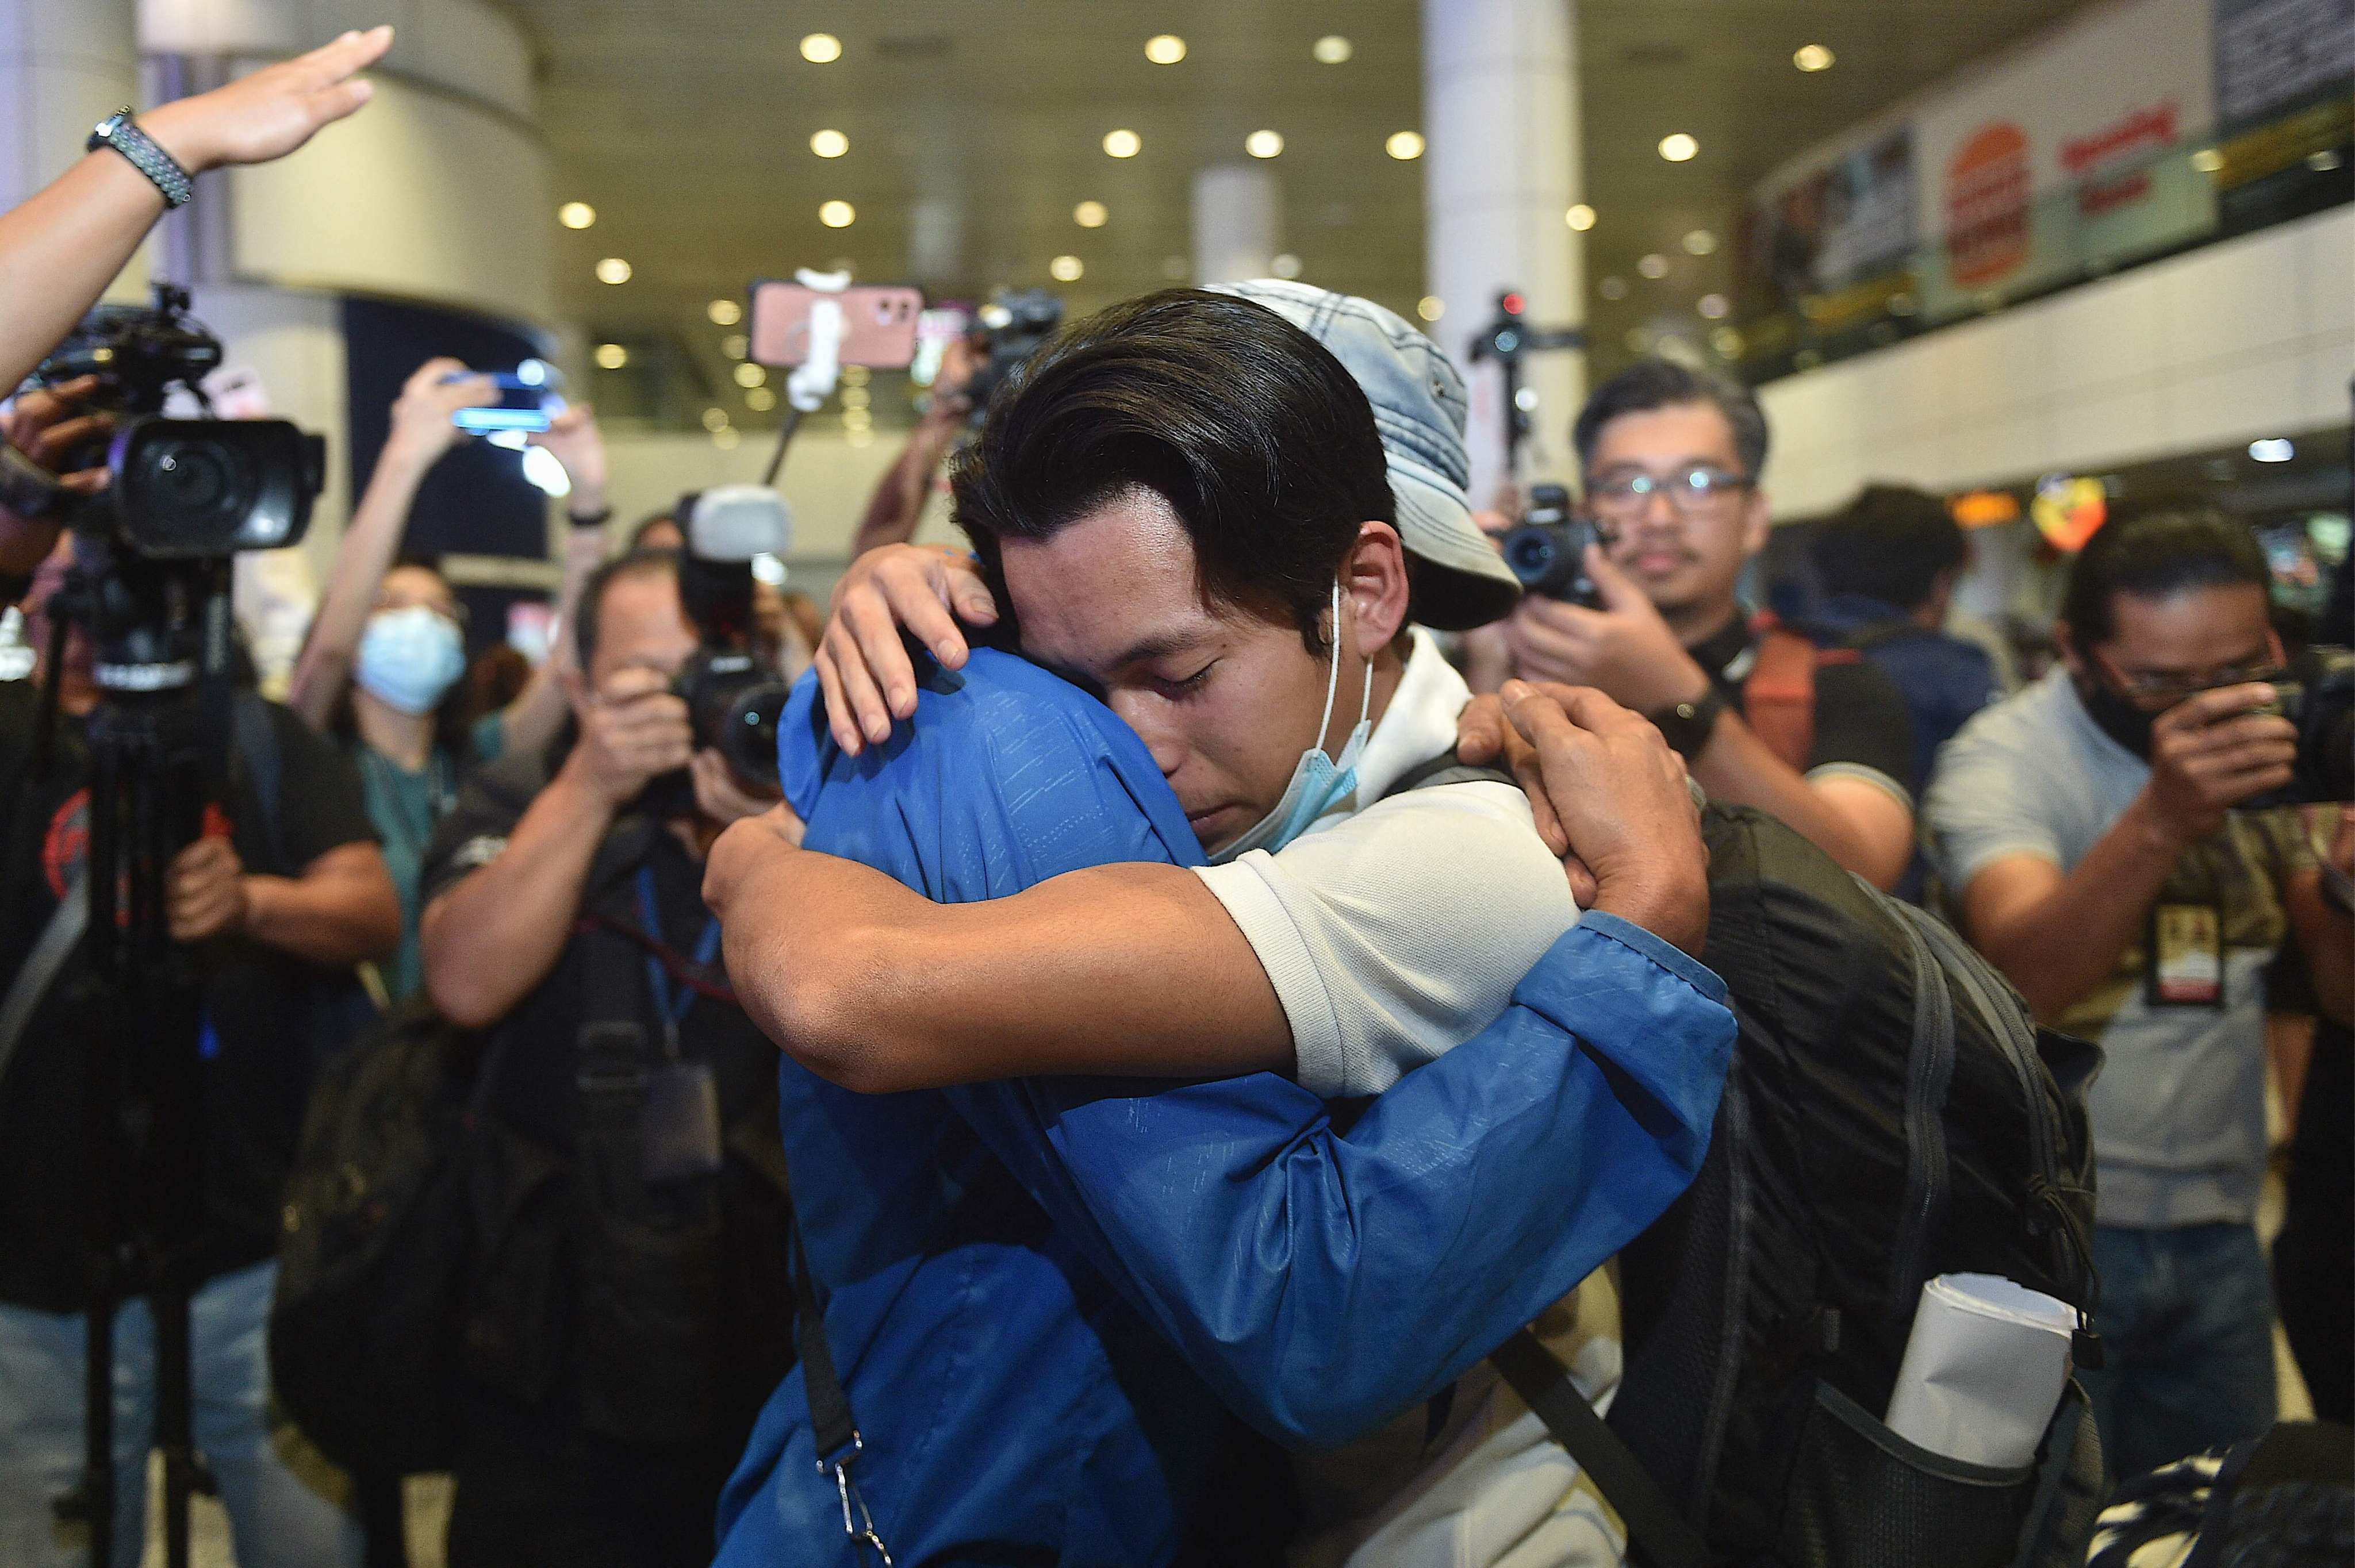 A Malaysian man rescued from a human trafficking syndicate in Myanmar is given a hug upon arrival in Kuala Lumpur in December. He said he was duped with the promise of a high salary through job adverts on social media. Photo: AFP